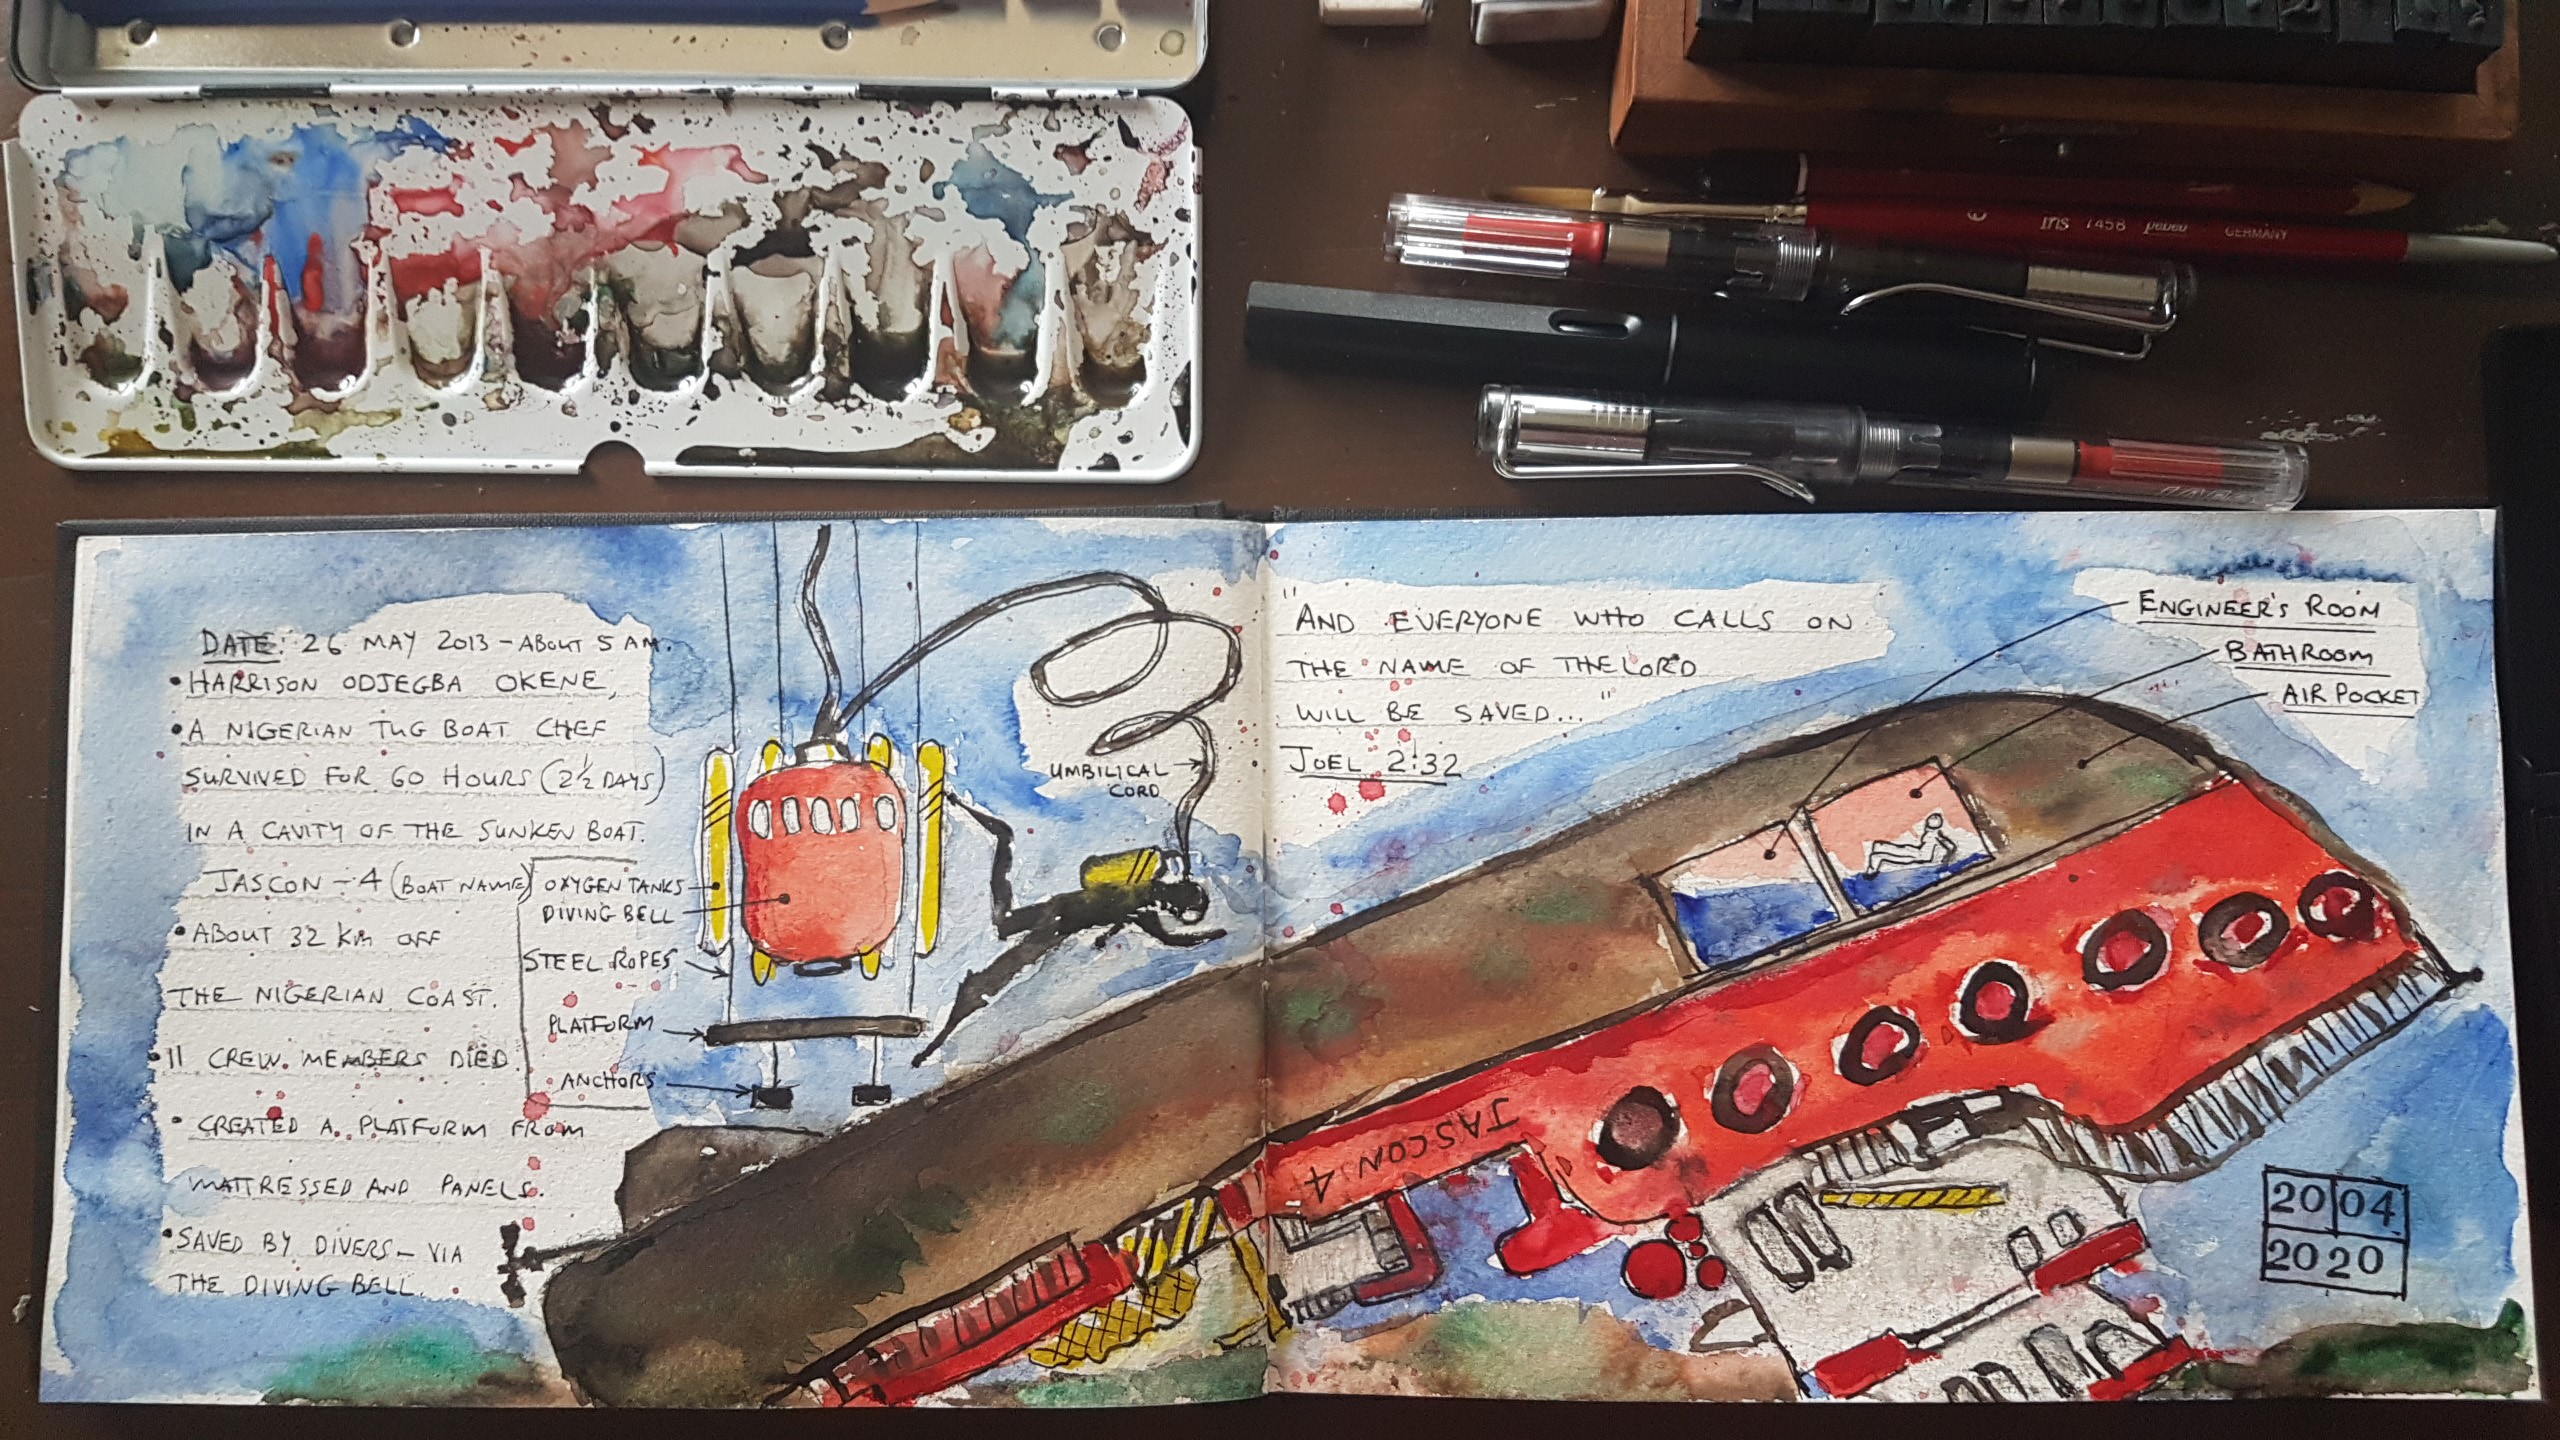 From my sketchbook: Sketch-diagram of the components for the rescue operation to save Harrison. ‘Those who call on the Name of the Lord will be saved.’ Soft pencil, fountain pen, and watercolours. Credit: W van Zyl April 2020.